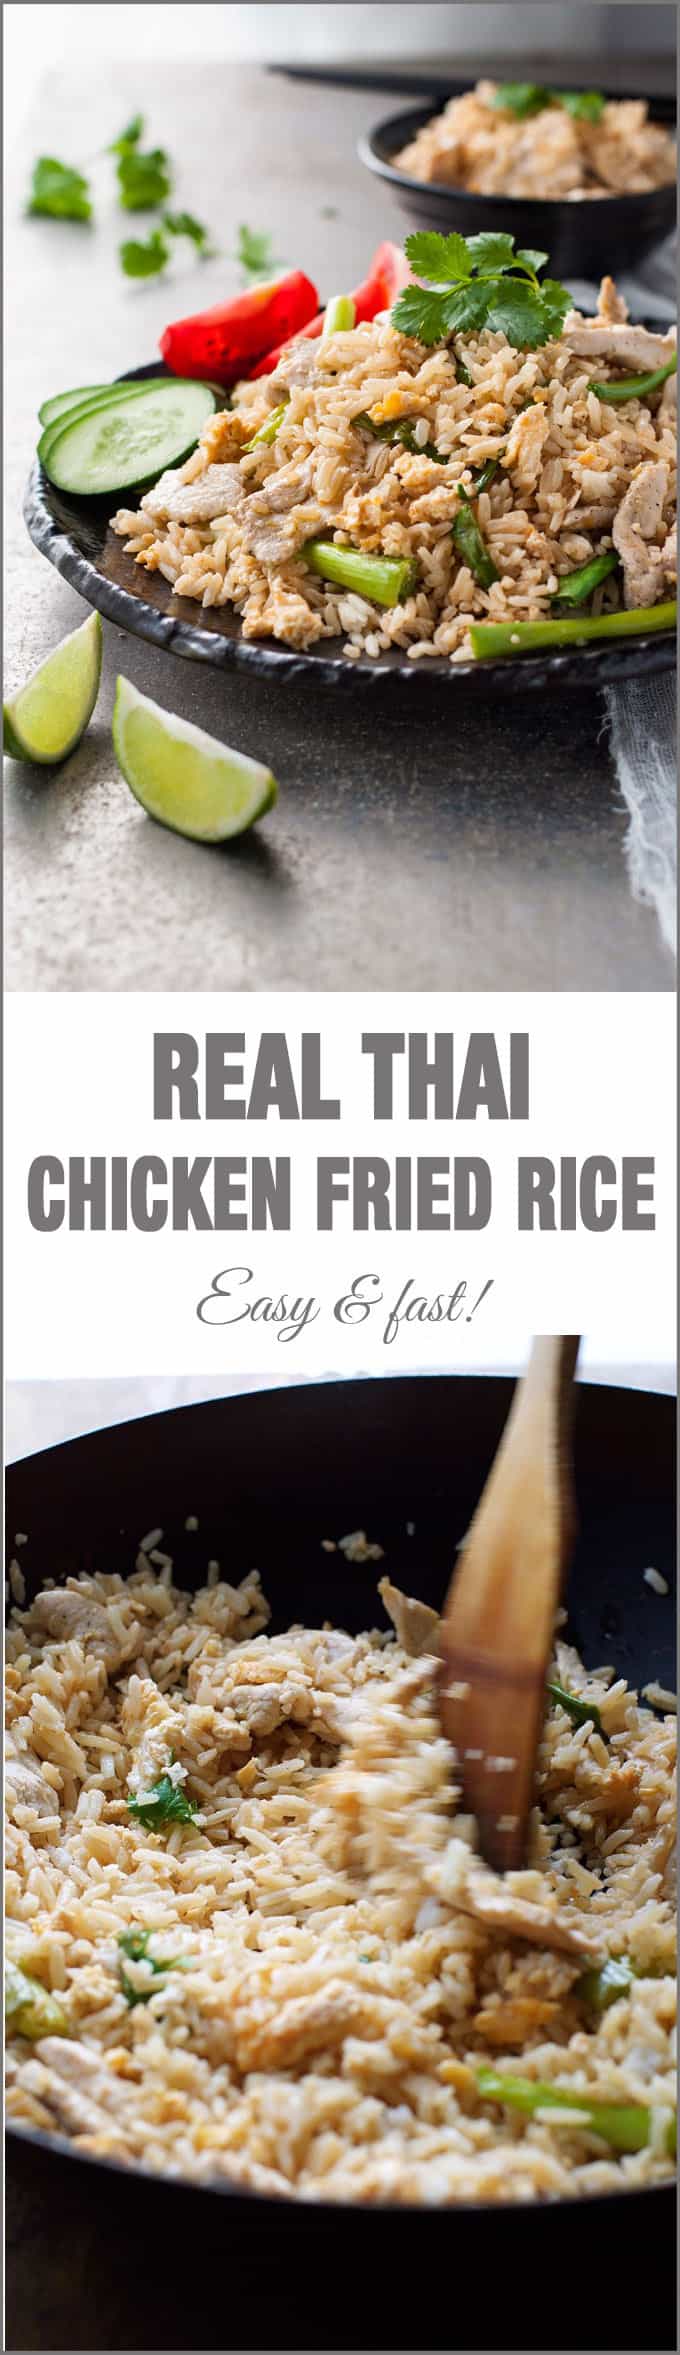 Real Thai Chicken Fried Rice - just like you get in Thailand and from Thai restaurants!